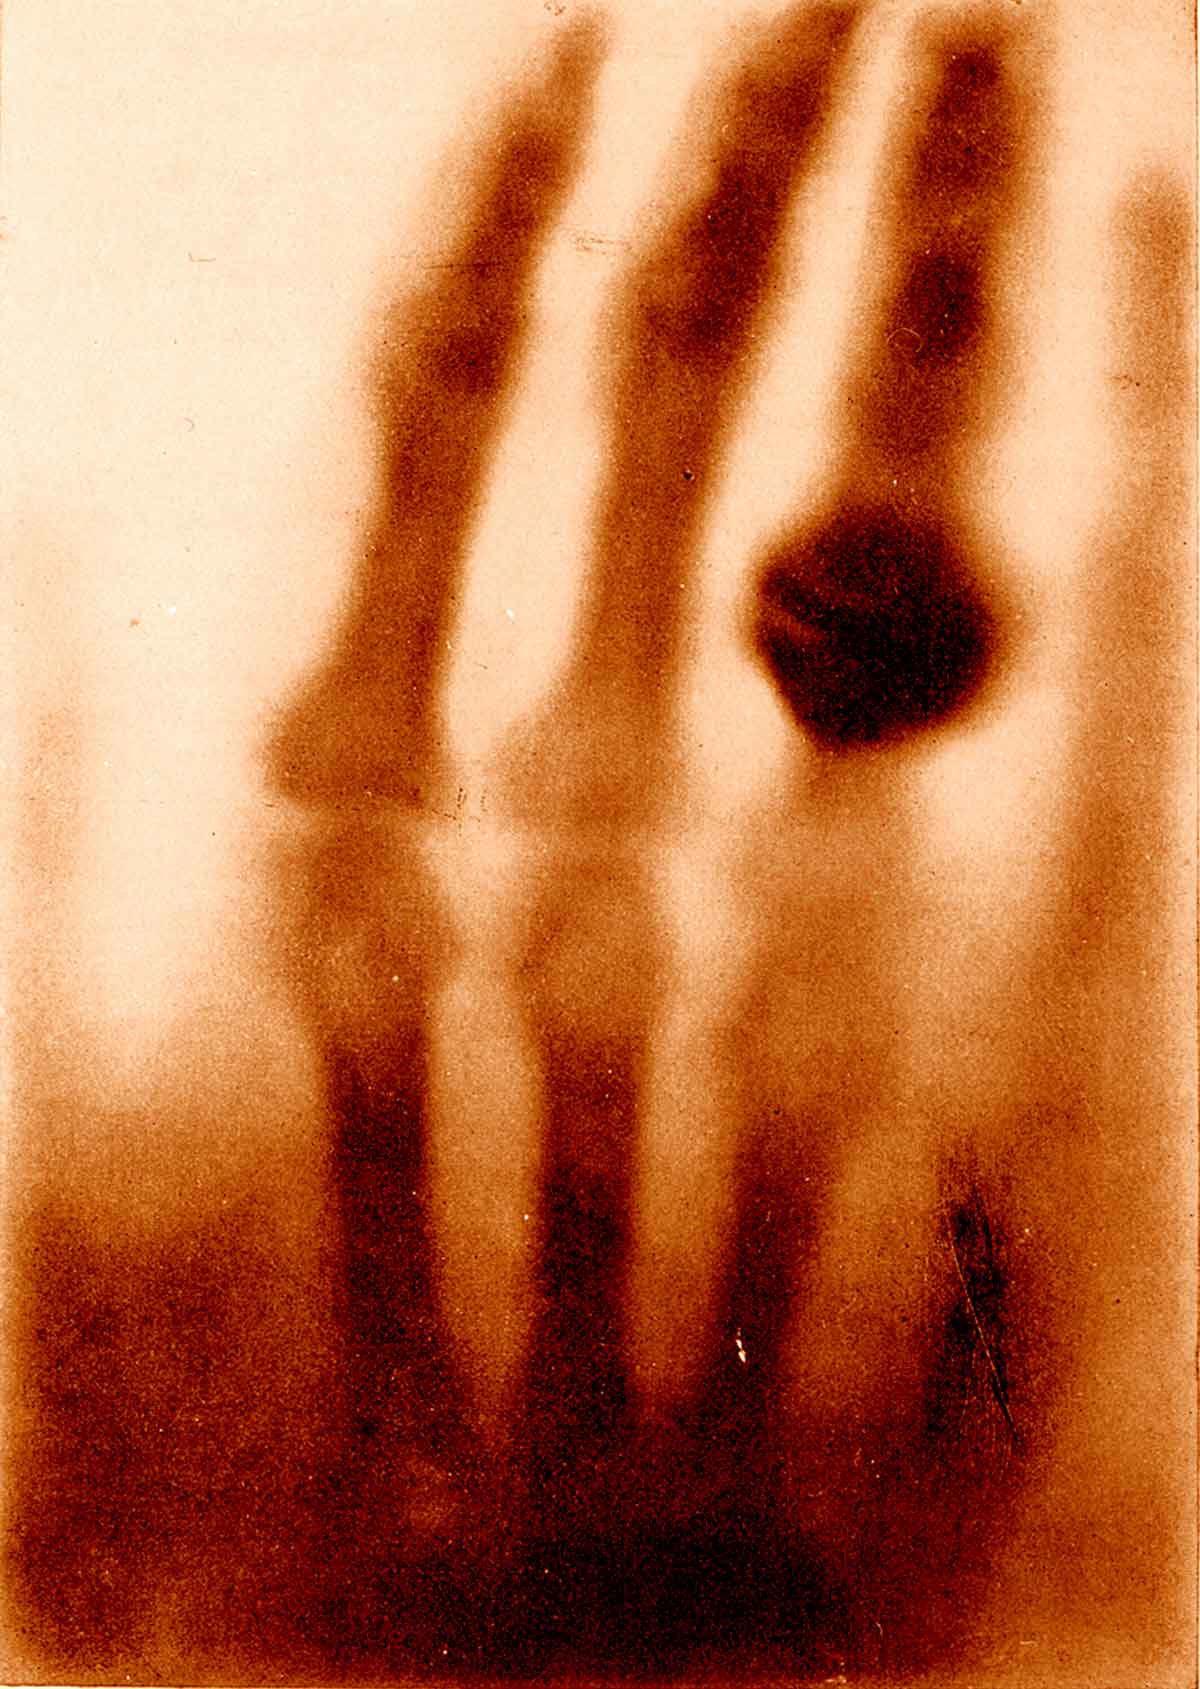 Wilhelm Conrad Roentgen discovers x-rays. This discovery is thought of as one of the greatest technological accomplishments of all time. It made a huge impact on cancer detection and treatment.Four years later (1899) Tage Anton Ultimus Sjogren successfully treats cancer with x-rays.1  1Morton, Leslie T., and Moore, Robert J. A Chronology of Medicine and Related Sciences. Aldershot, England: Scholar Press, 1997            